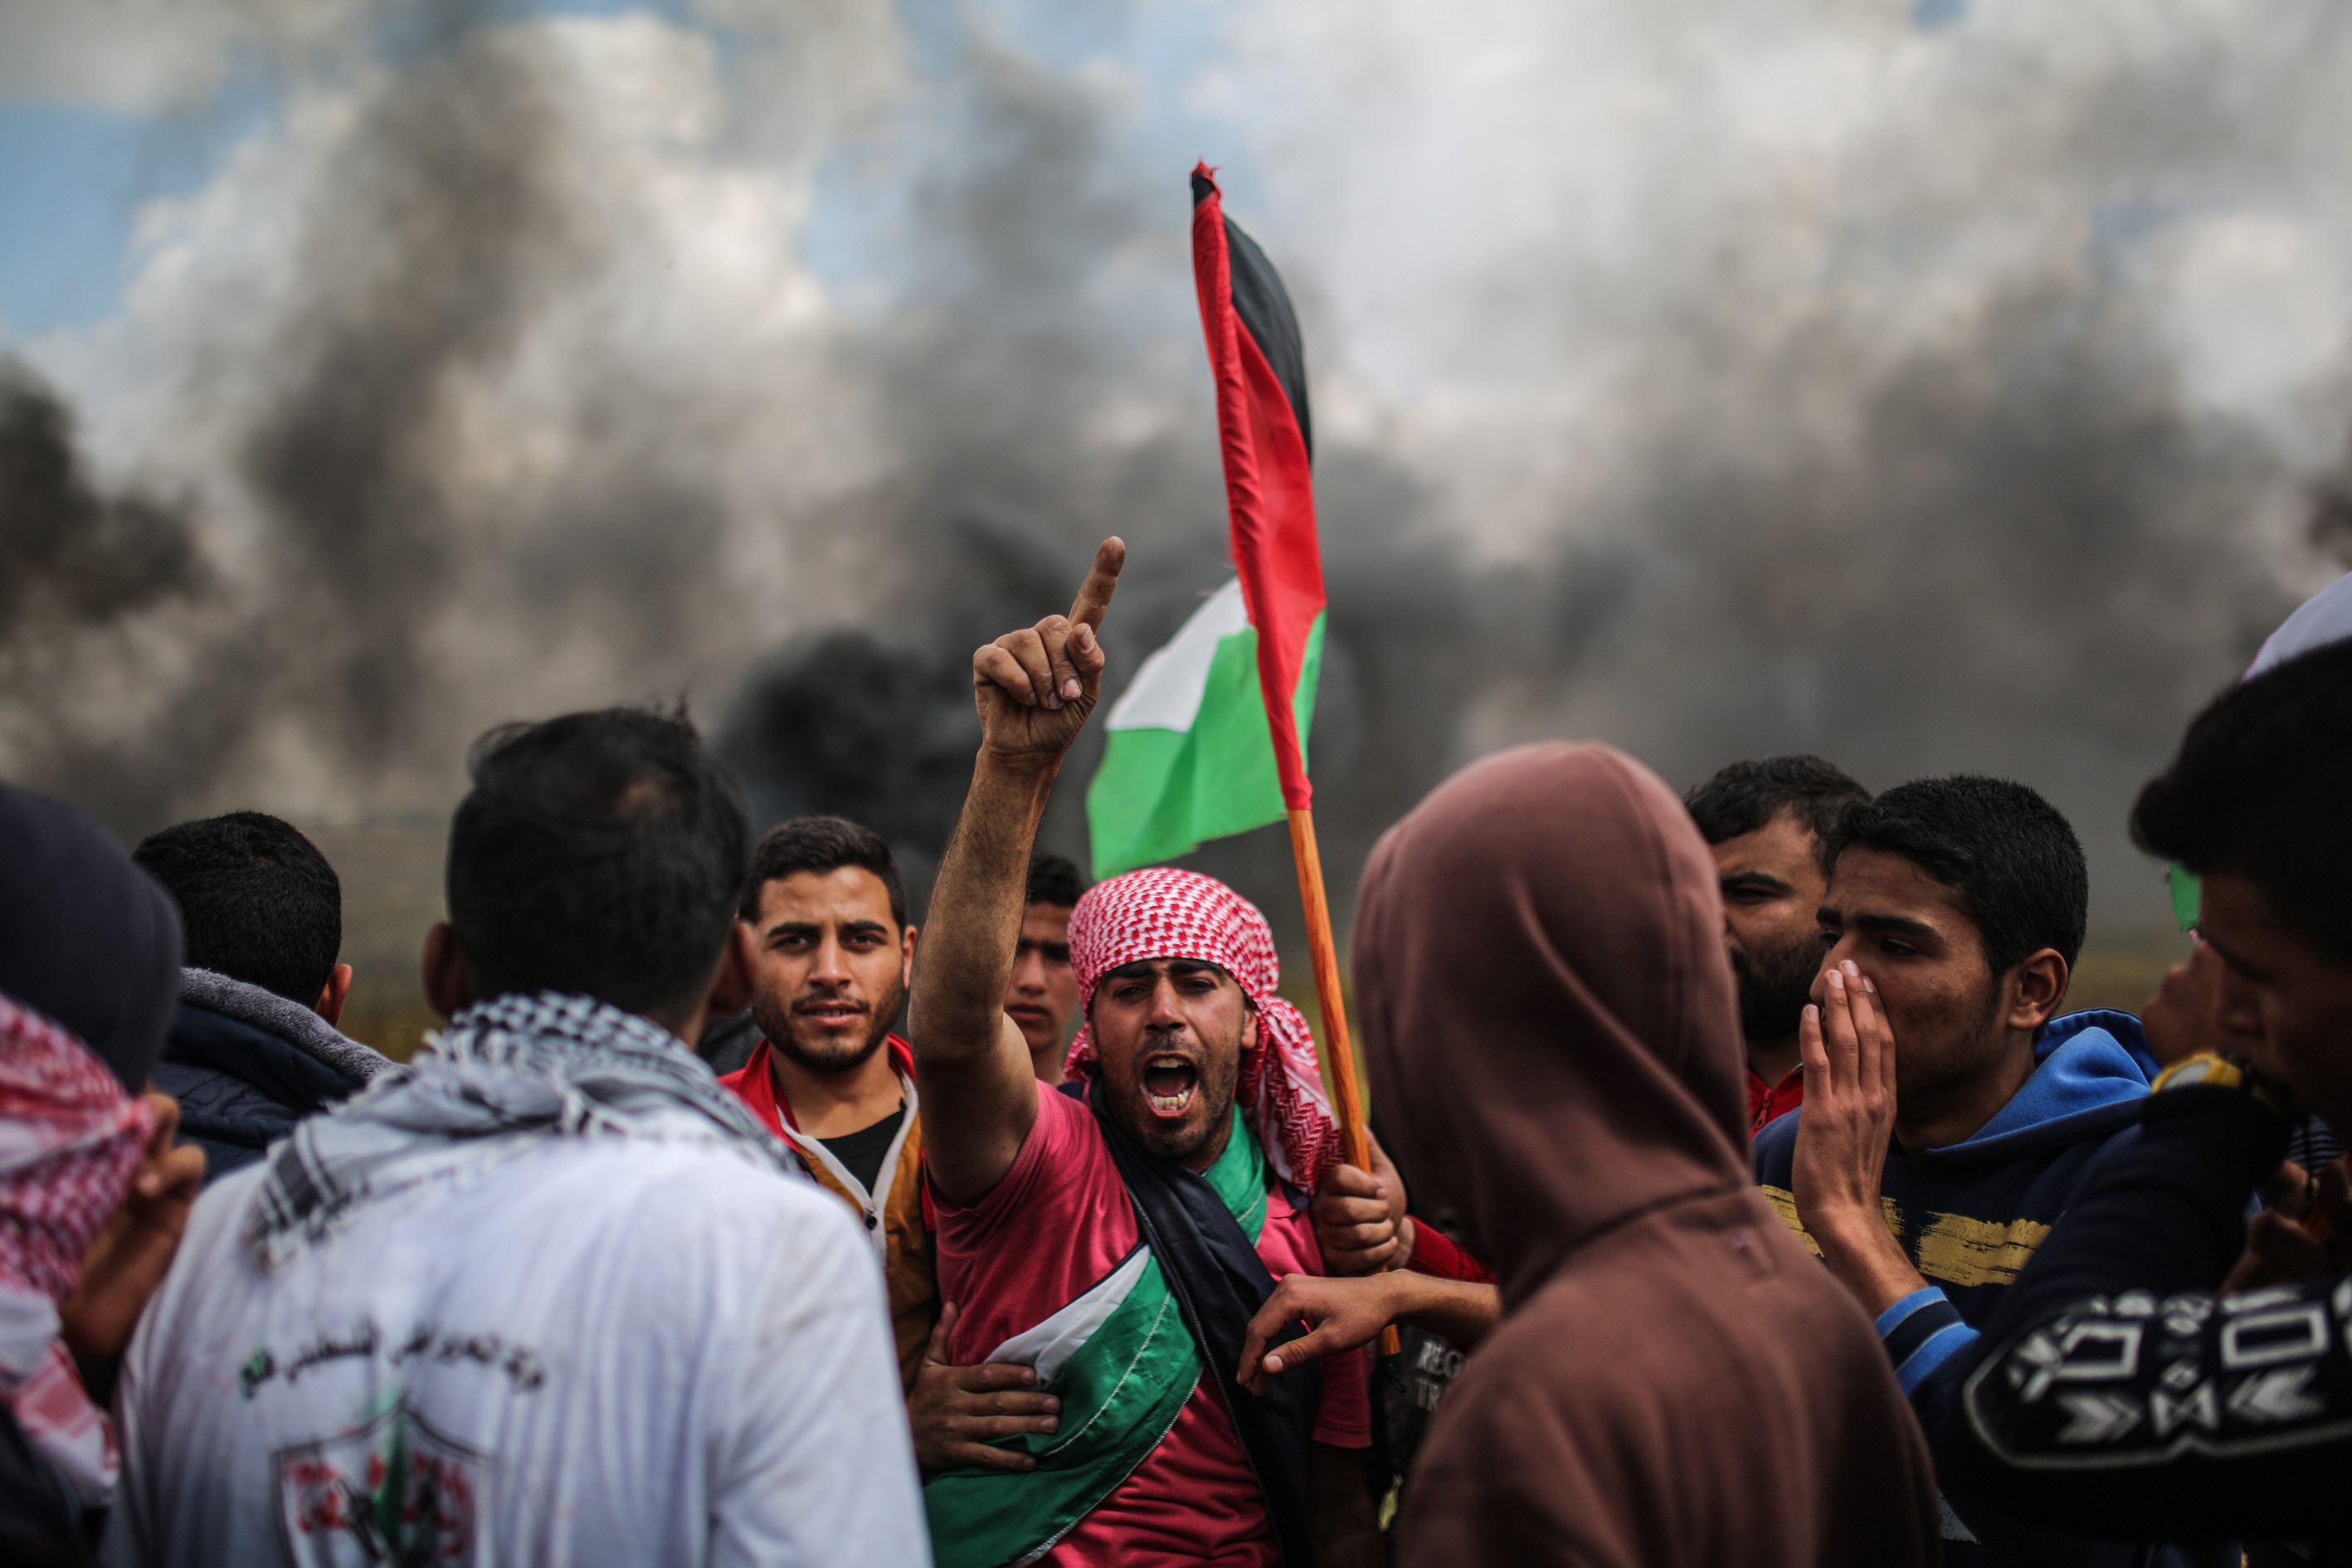 KHAN YUNIS, GAZA - MARCH 30: Demonstrators shout slogans and hold Palestinian flags during the demonstration under the name of the "Great Return March" at Israeli border in eastern part of Khan Yunis, Gaza on March 30, 2018. Dubbed the Great Return March, Fridays rallies in the Gaza Strip also coincide with Land Day, which commemorates the murder of six Palestinians by Israeli forces in 1976. It is also intended to pressure Israel to lift its decade-long blockade of the coastal enclave. (Photo by Mustafa Hassona/Anadolu Agency/Getty Images)